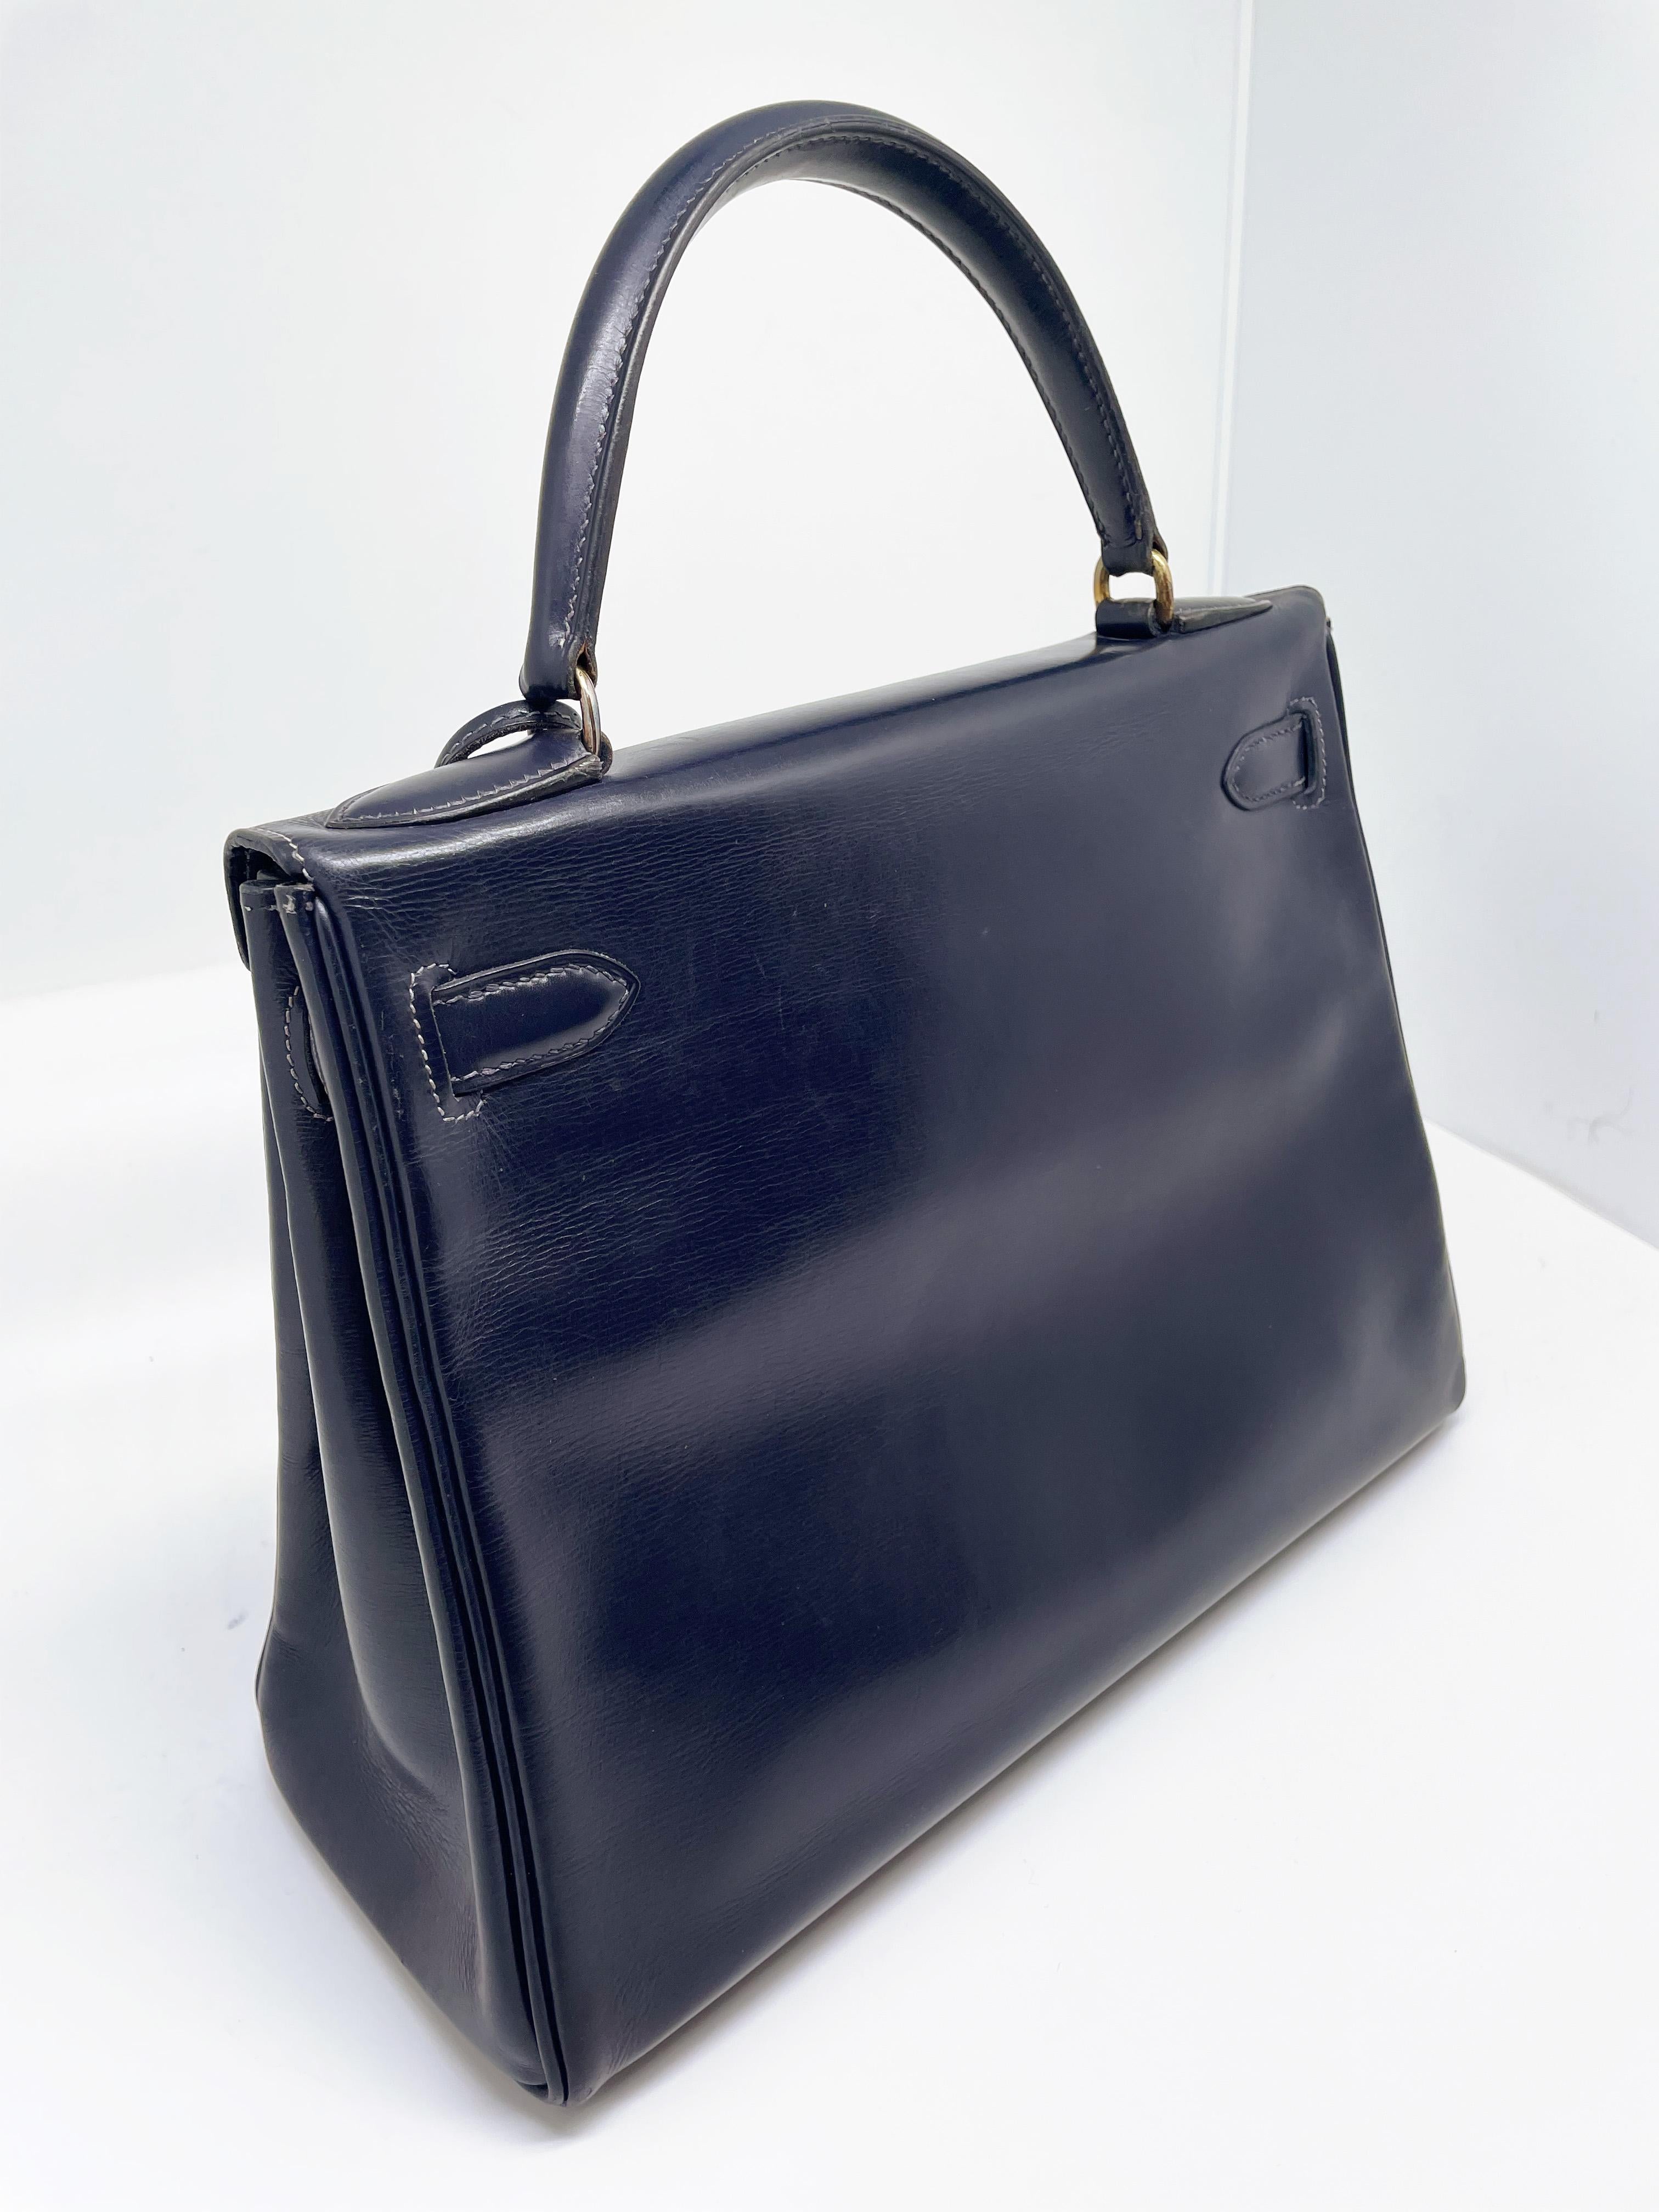 Exceptional Hermès Kelly bag 28 returned in navy box leather 6